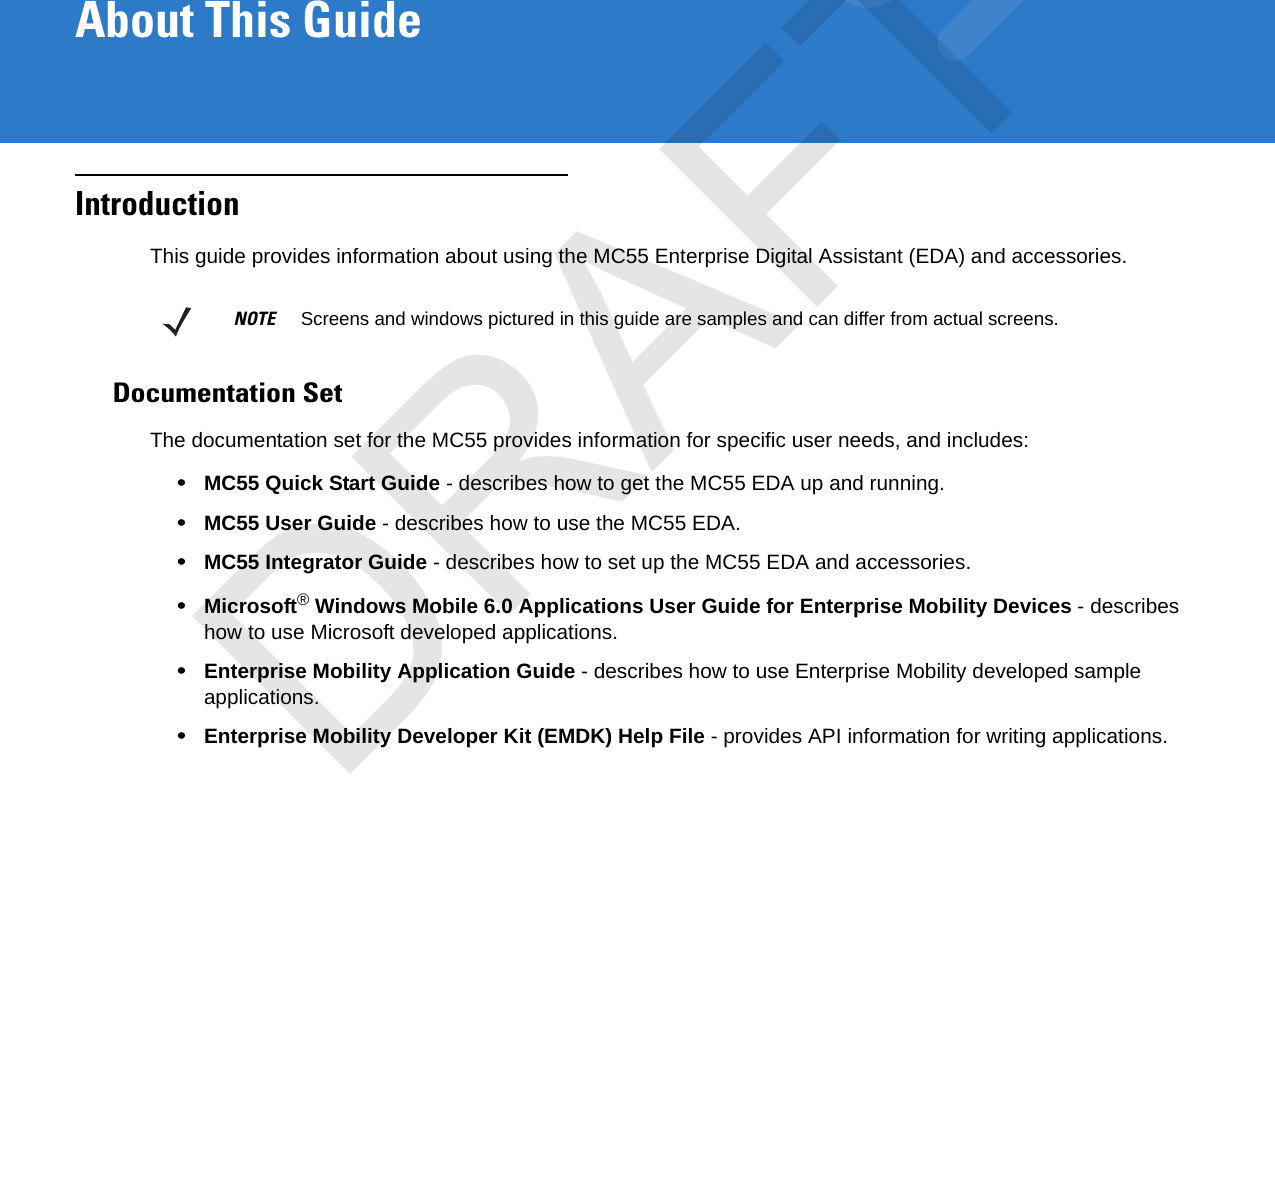 About This GuideIntroductionThis guide provides information about using the MC55 Enterprise Digital Assistant (EDA) and accessories.Documentation SetThe documentation set for the MC55 provides information for specific user needs, and includes:•MC55 Quick Start Guide - describes how to get the MC55 EDA up and running.•MC55 User Guide - describes how to use the MC55 EDA.•MC55 Integrator Guide - describes how to set up the MC55 EDA and accessories.•Microsoft® Windows Mobile 6.0 Applications User Guide for Enterprise Mobility Devices - describes how to use Microsoft developed applications.•Enterprise Mobility Application Guide - describes how to use Enterprise Mobility developed sample applications.•Enterprise Mobility Developer Kit (EMDK) Help File - provides API information for writing applications.NOTE     Screens and windows pictured in this guide are samples and can differ from actual screens.DRAFT